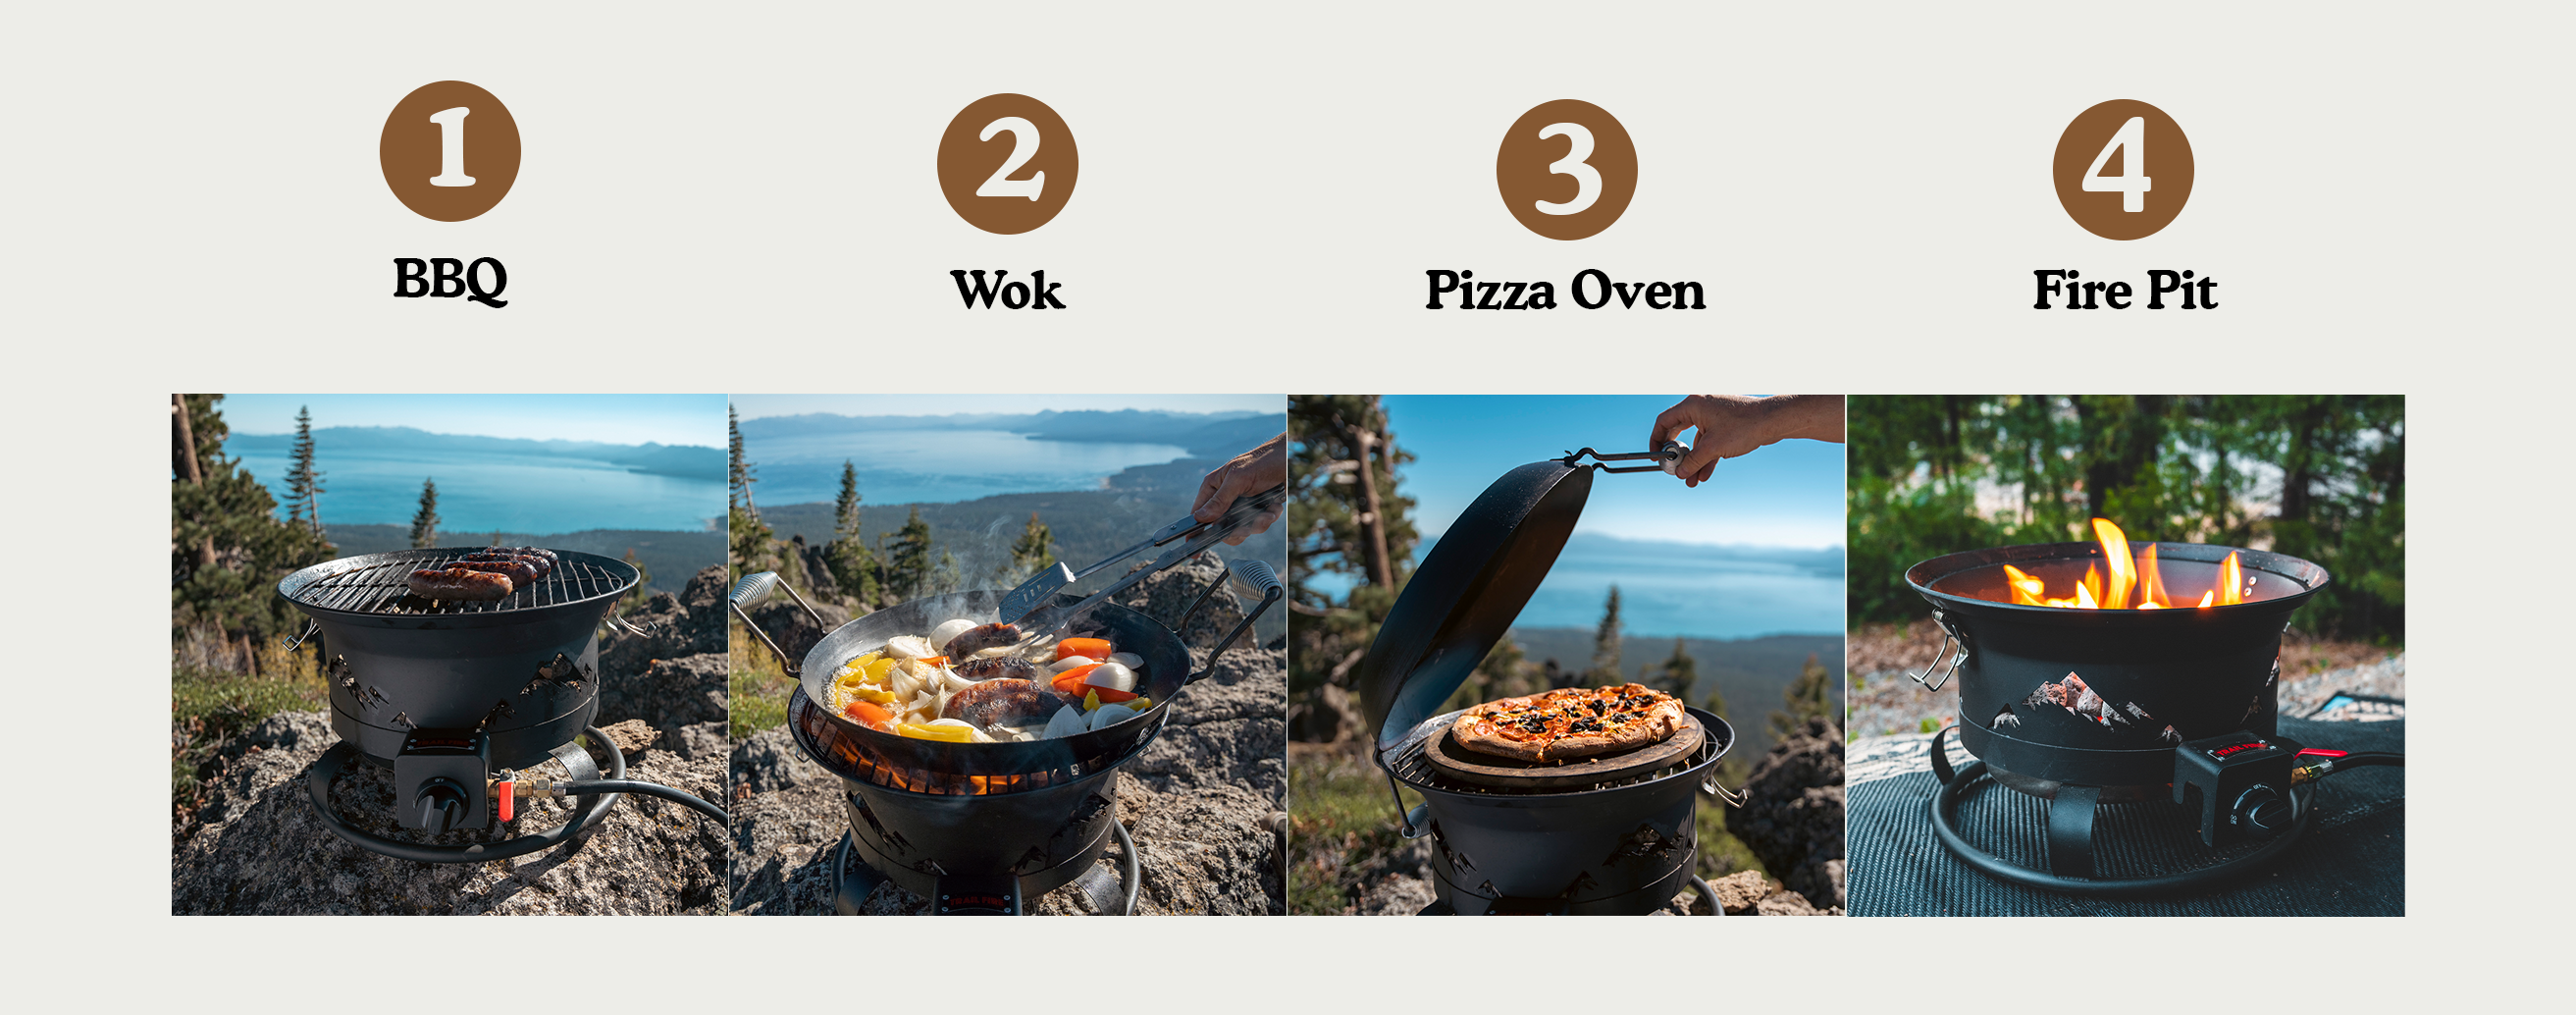 4-in-1 portable cooker modes - bbq, wok, pizza oven, and fire pit